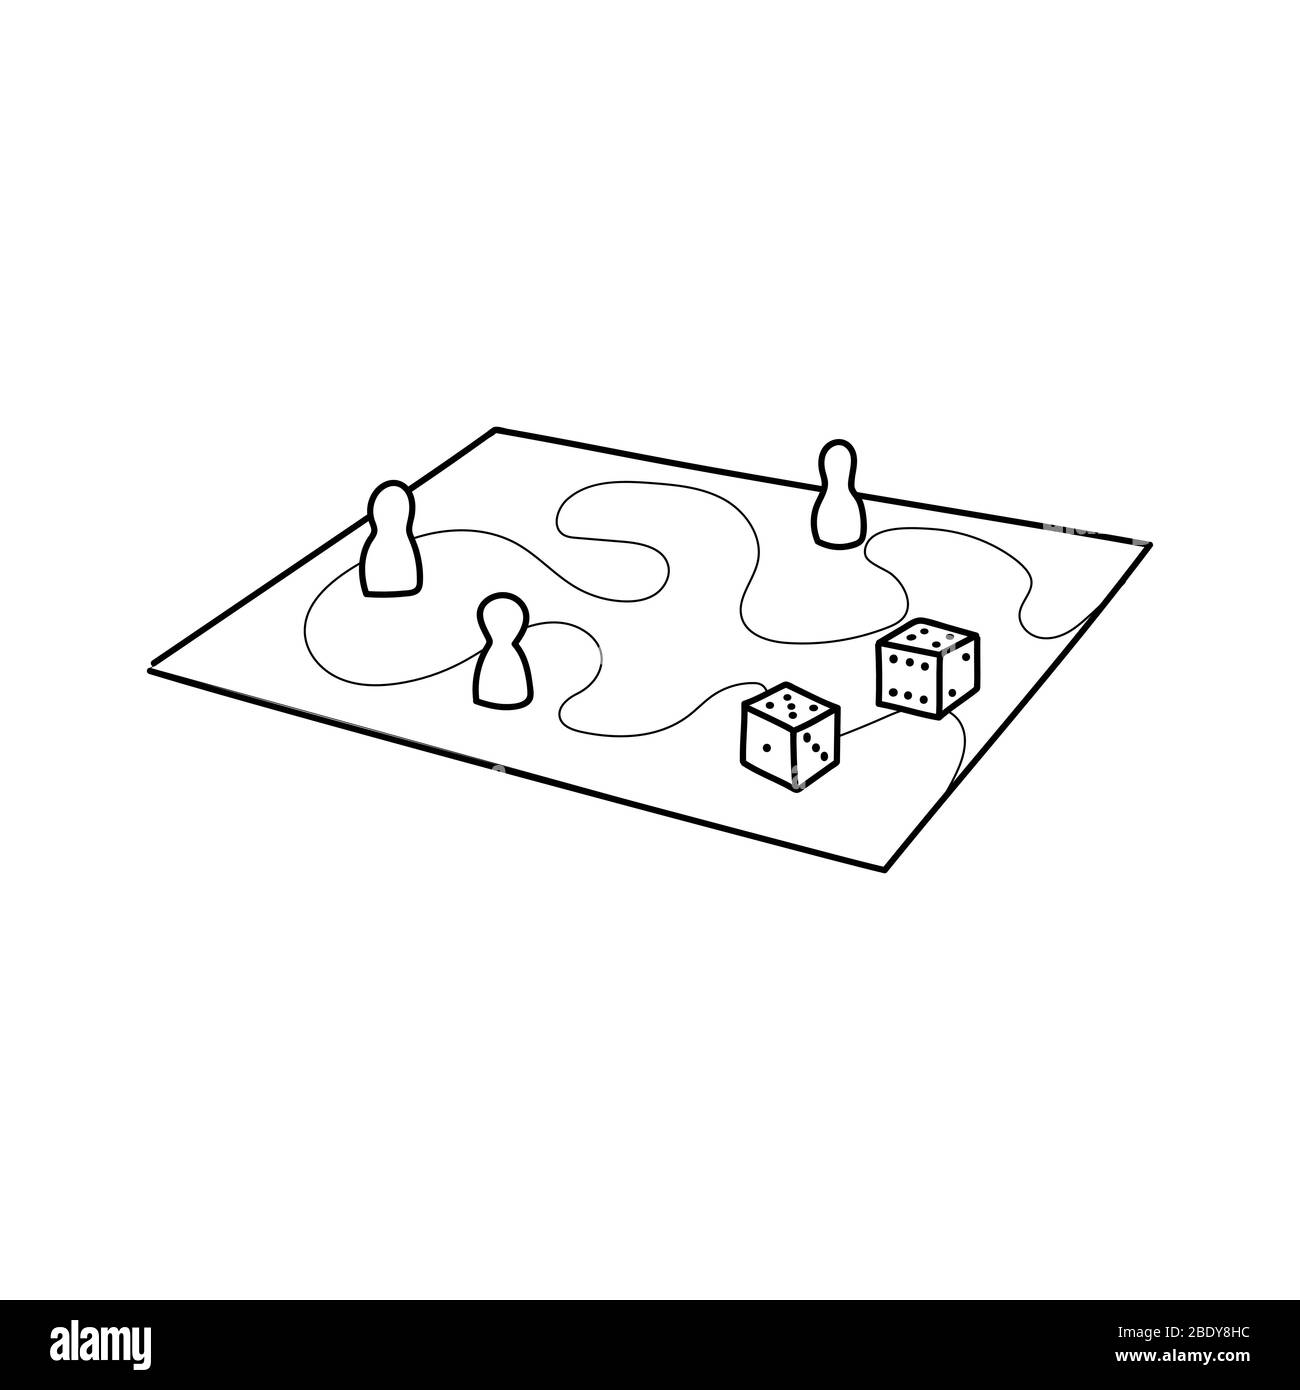 Various board games and many figurines background. Dice, chart, map, silhouettes hand drawn illustration Stock Vector